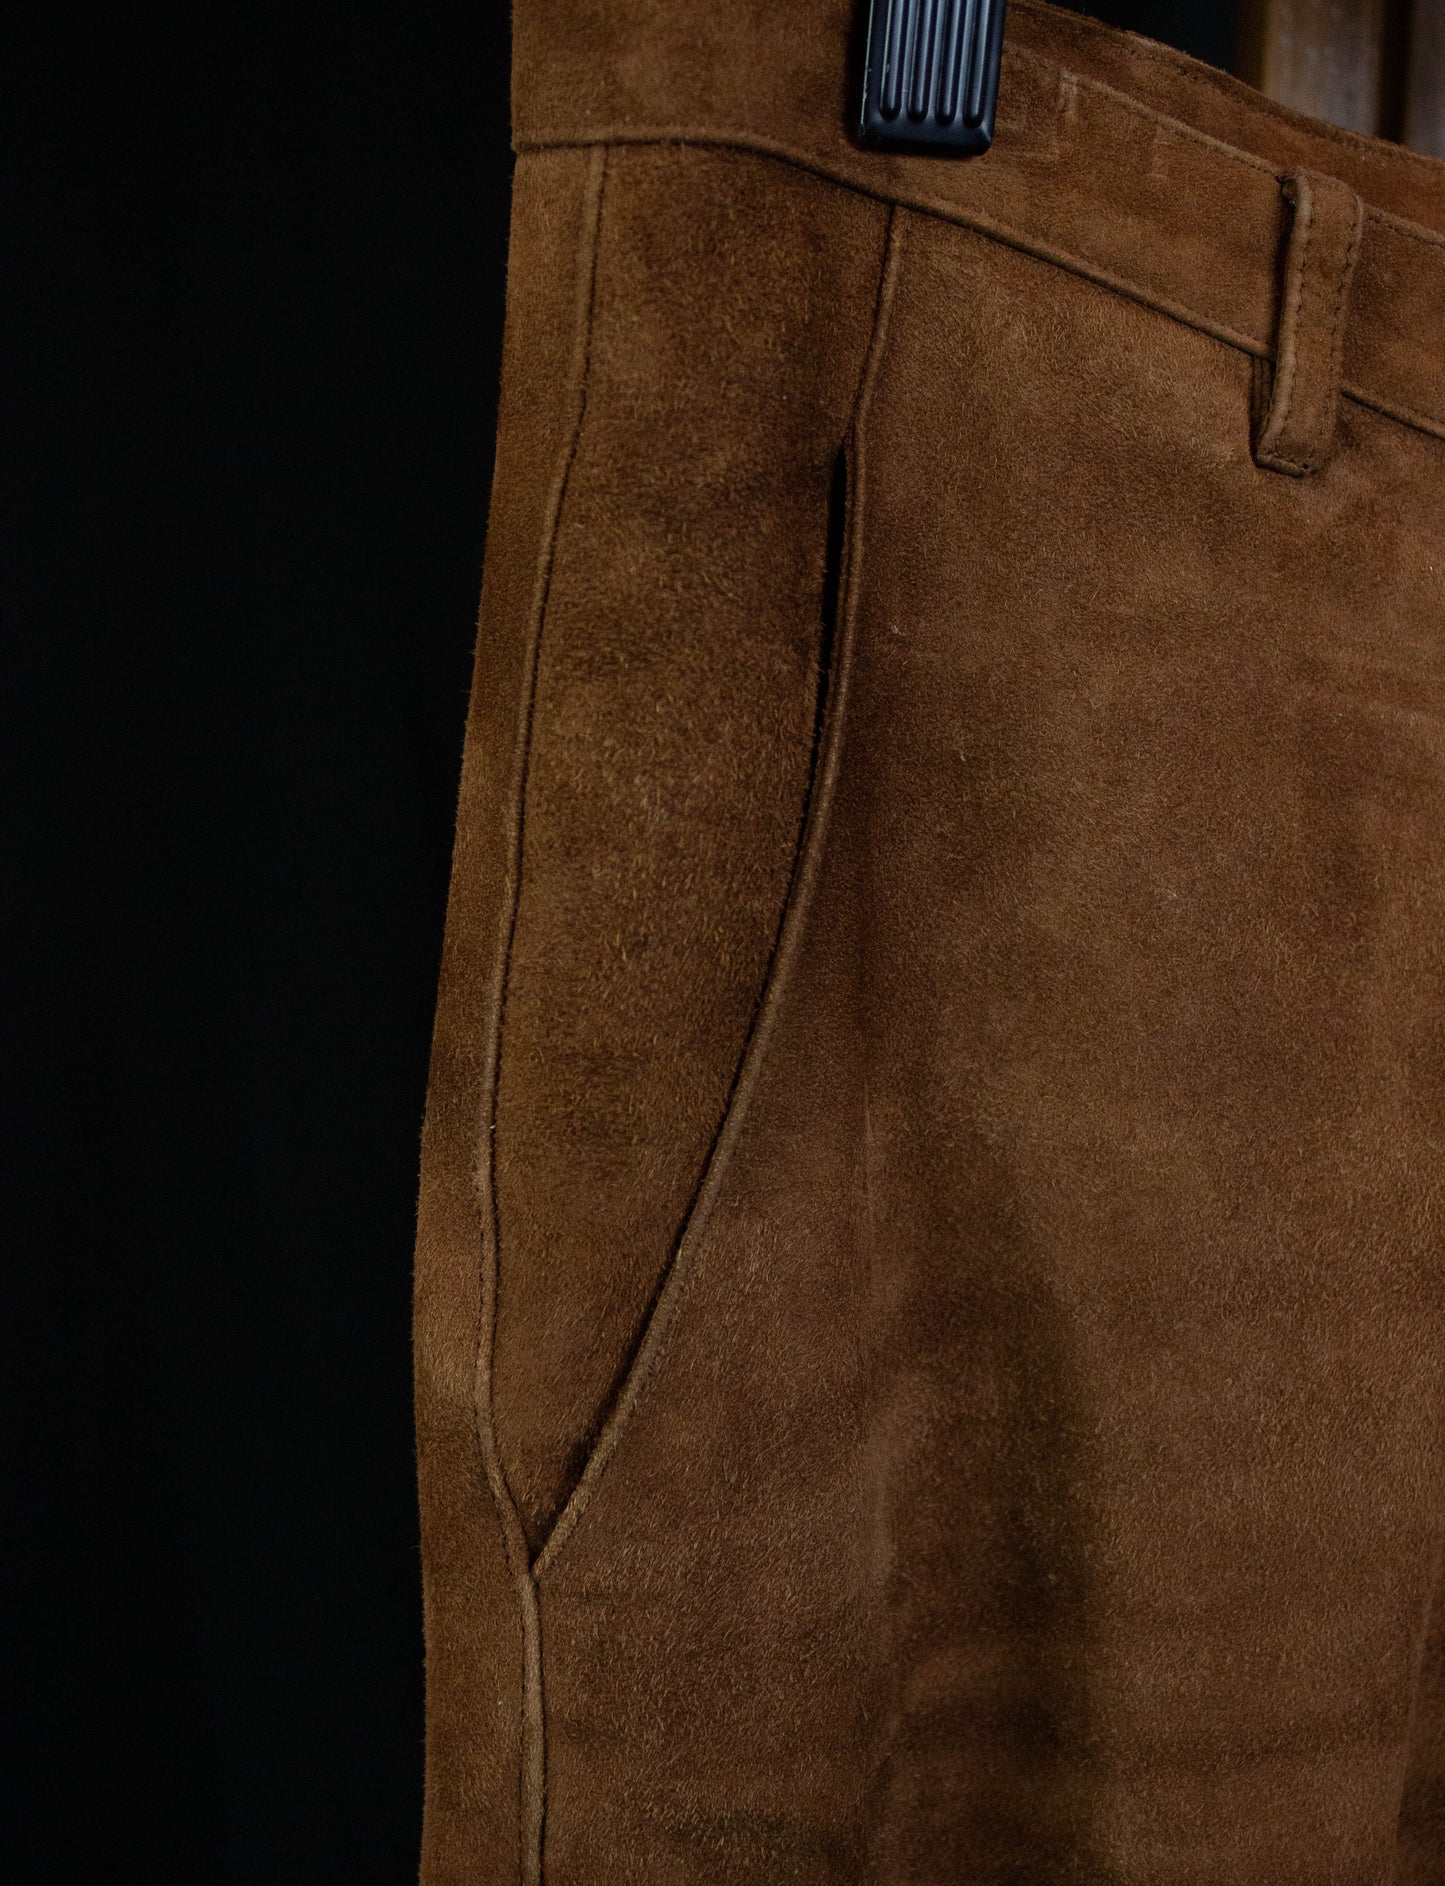 Prada Brown Suede Leather Flared Pants 27w